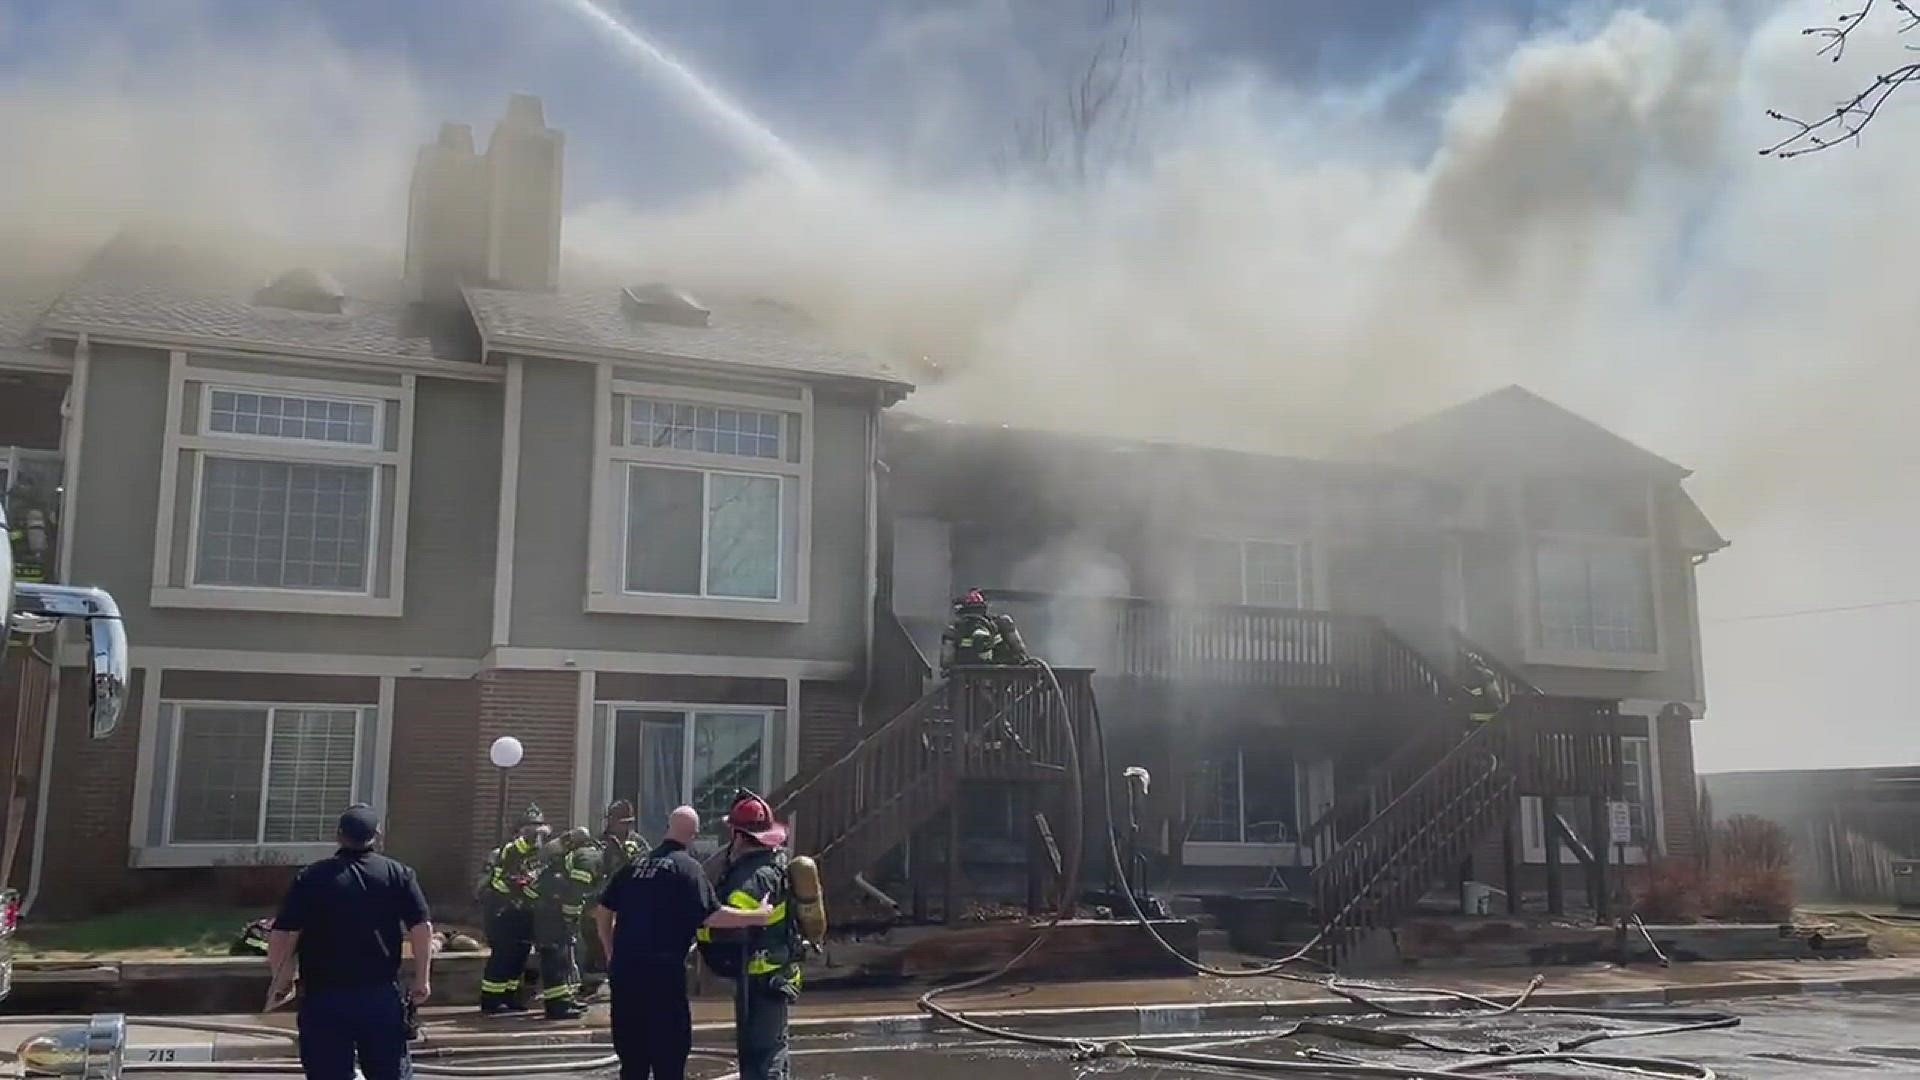 One person has been injured in a fire burning in a 2-story condo building in Denver.